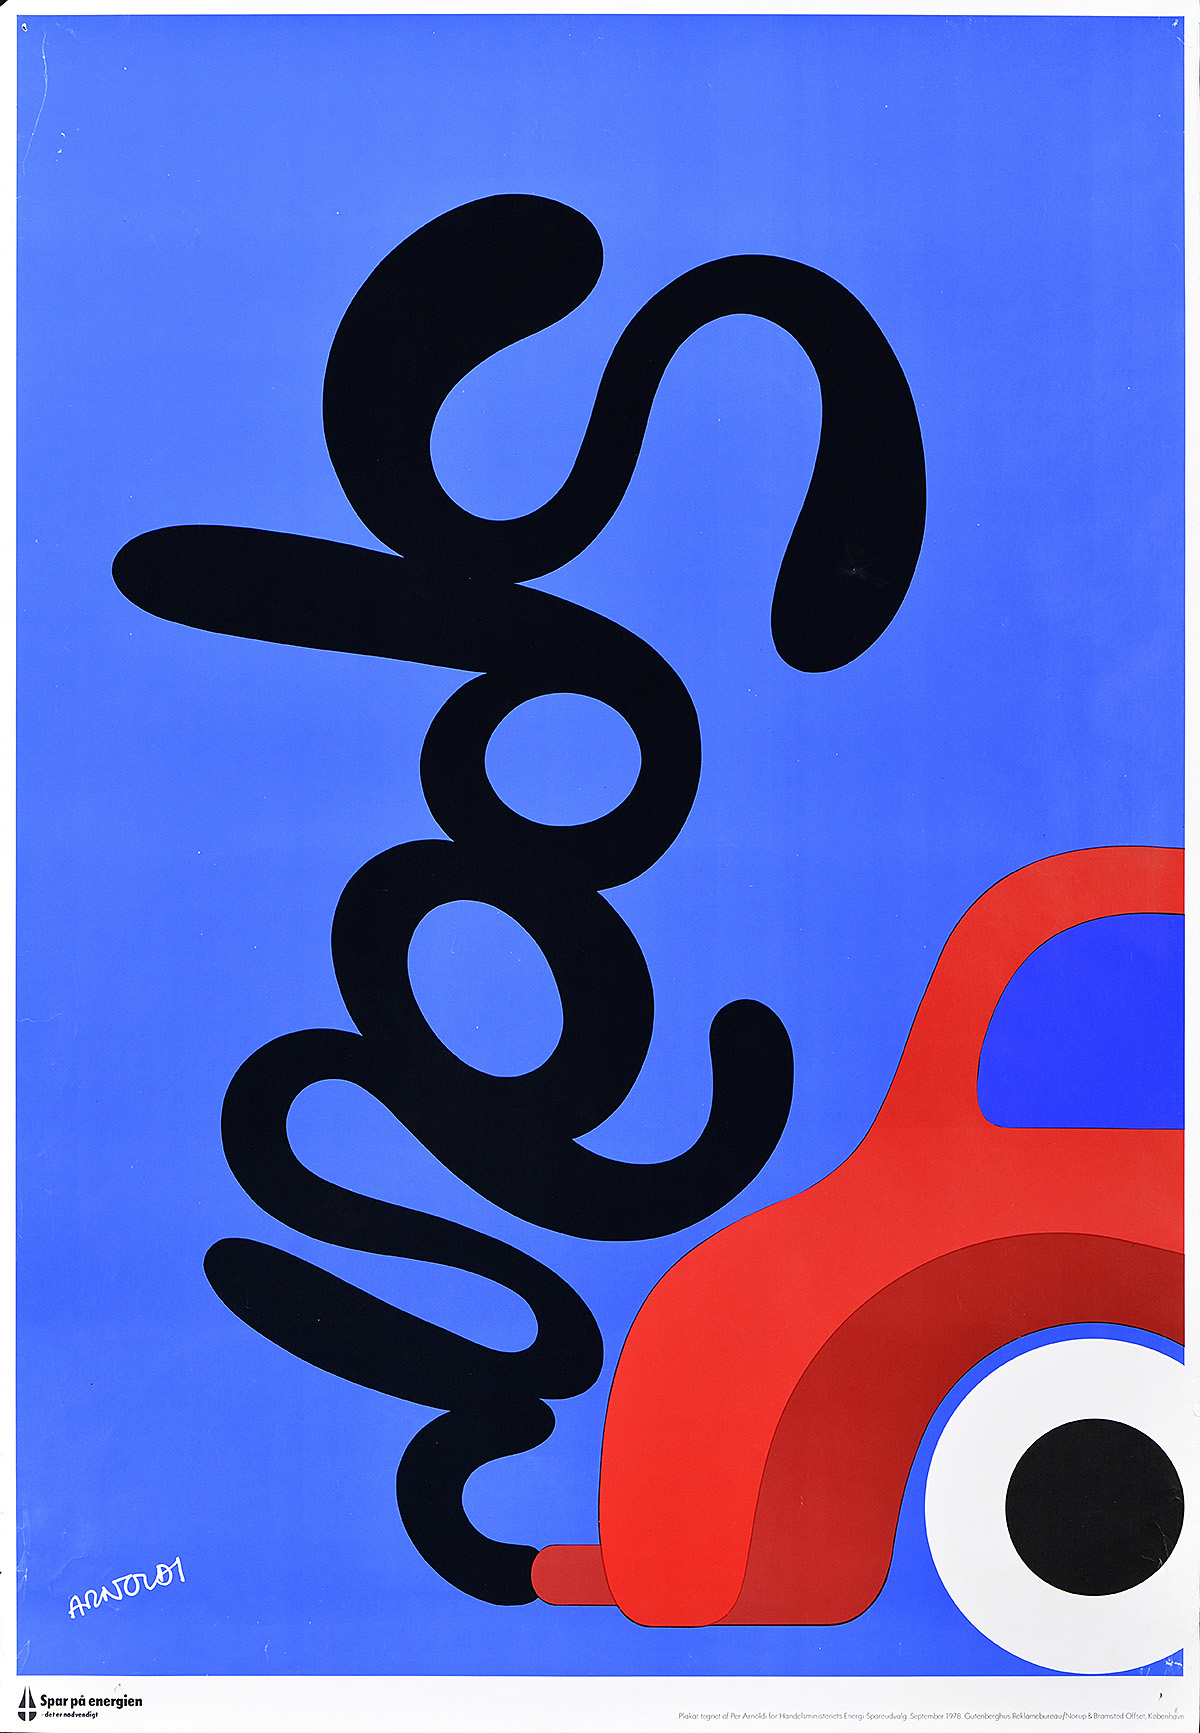 A poster of the back of a red car with the words 